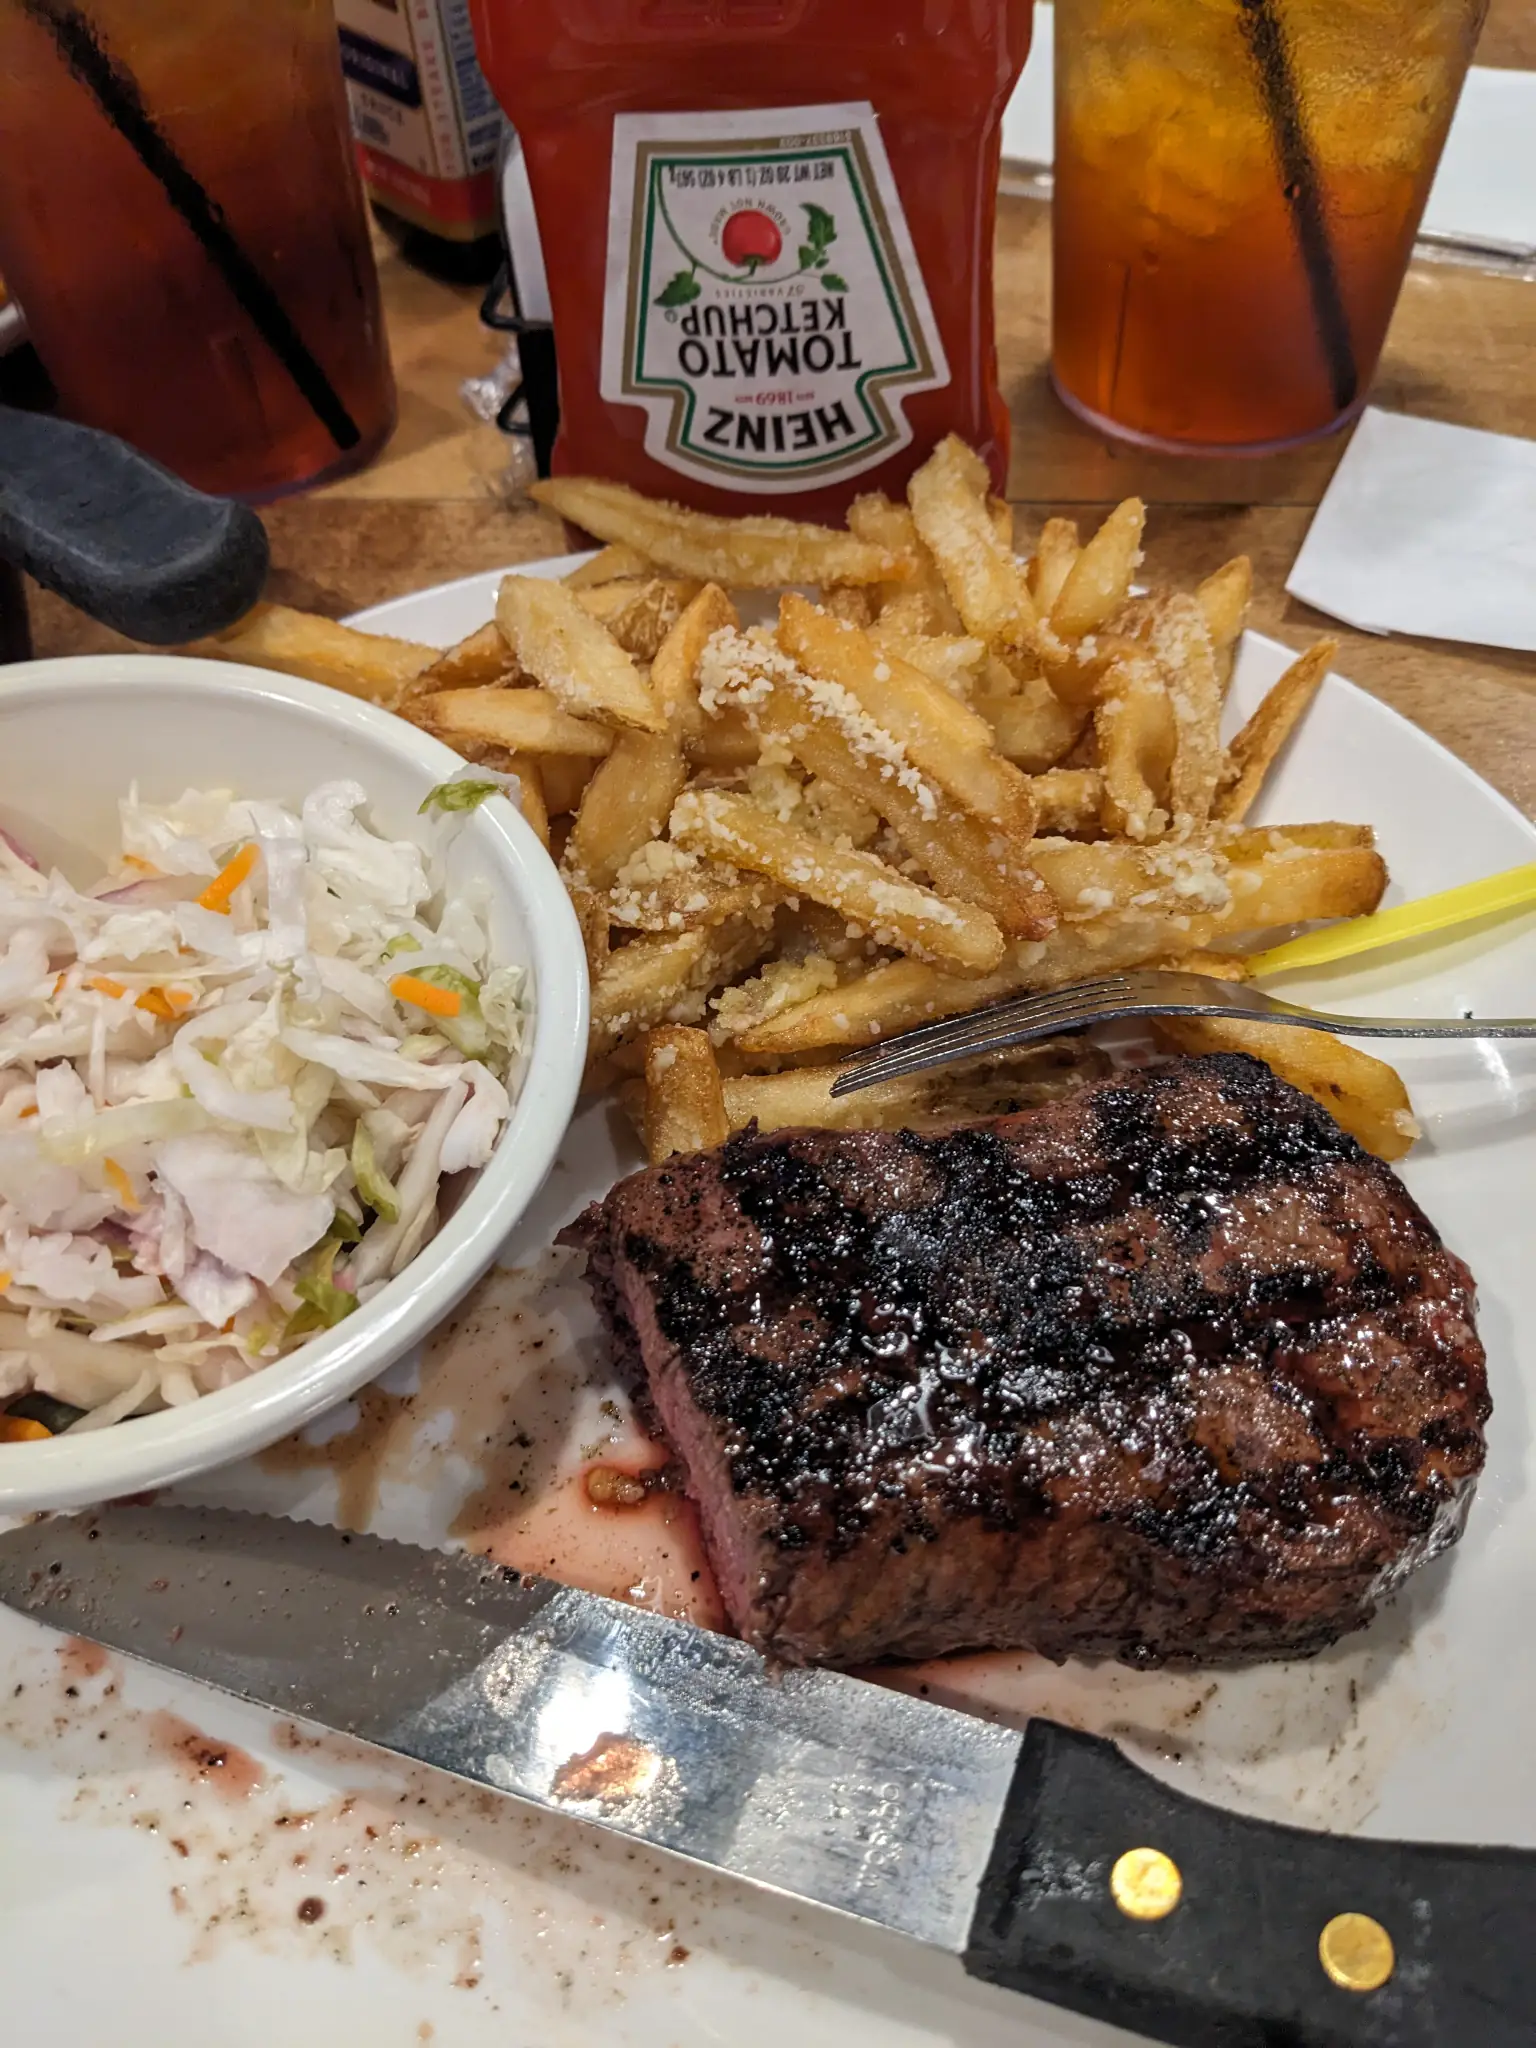 A plate with steak, french fries, and cole slaw.